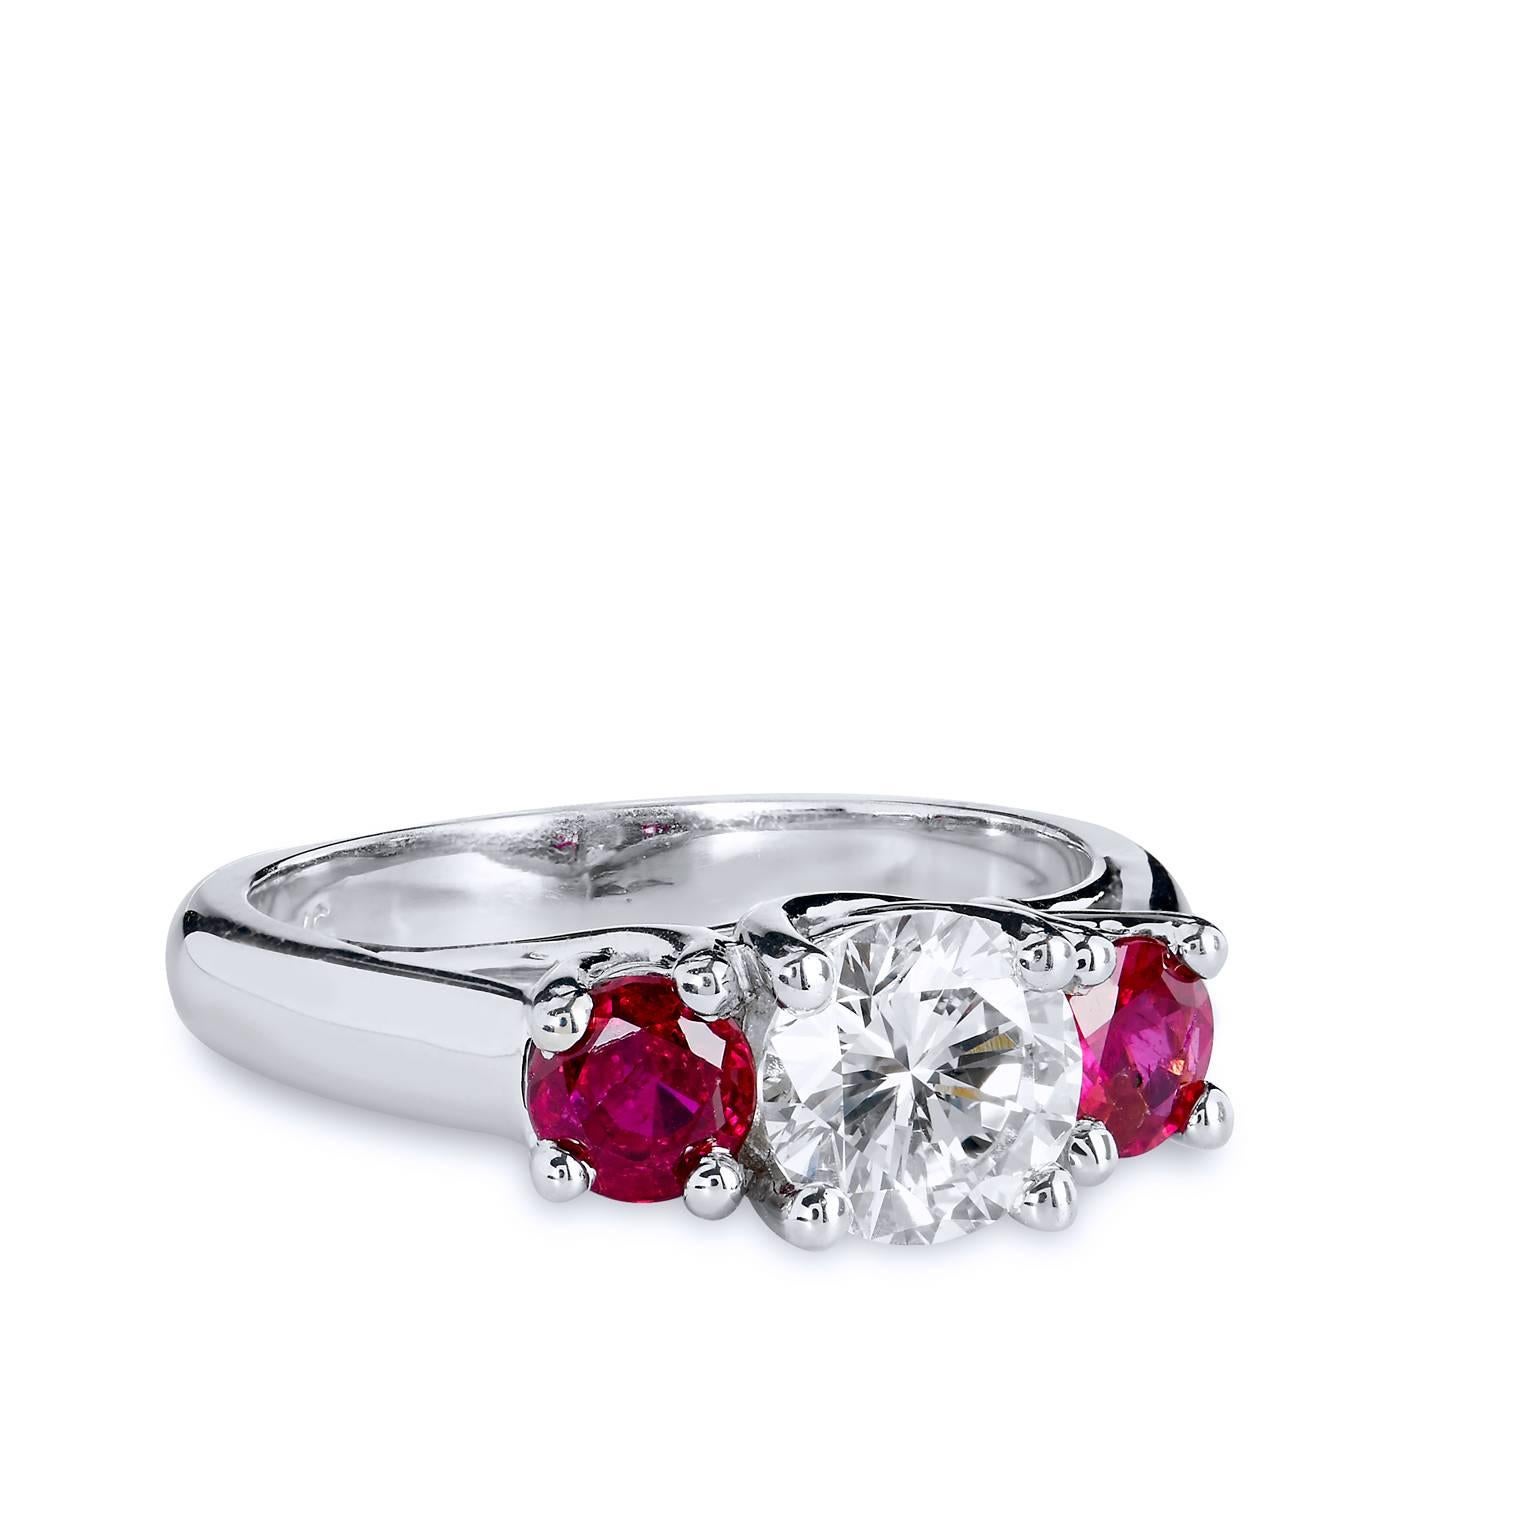 Handcrafted in 14kt white gold, this ring features two of the most desired gemstones-diamonds and rubies. A 1ct GIA certified center diamond graded L-VS1 shines bright amidst .80cts of Burma rubies set on either side. 